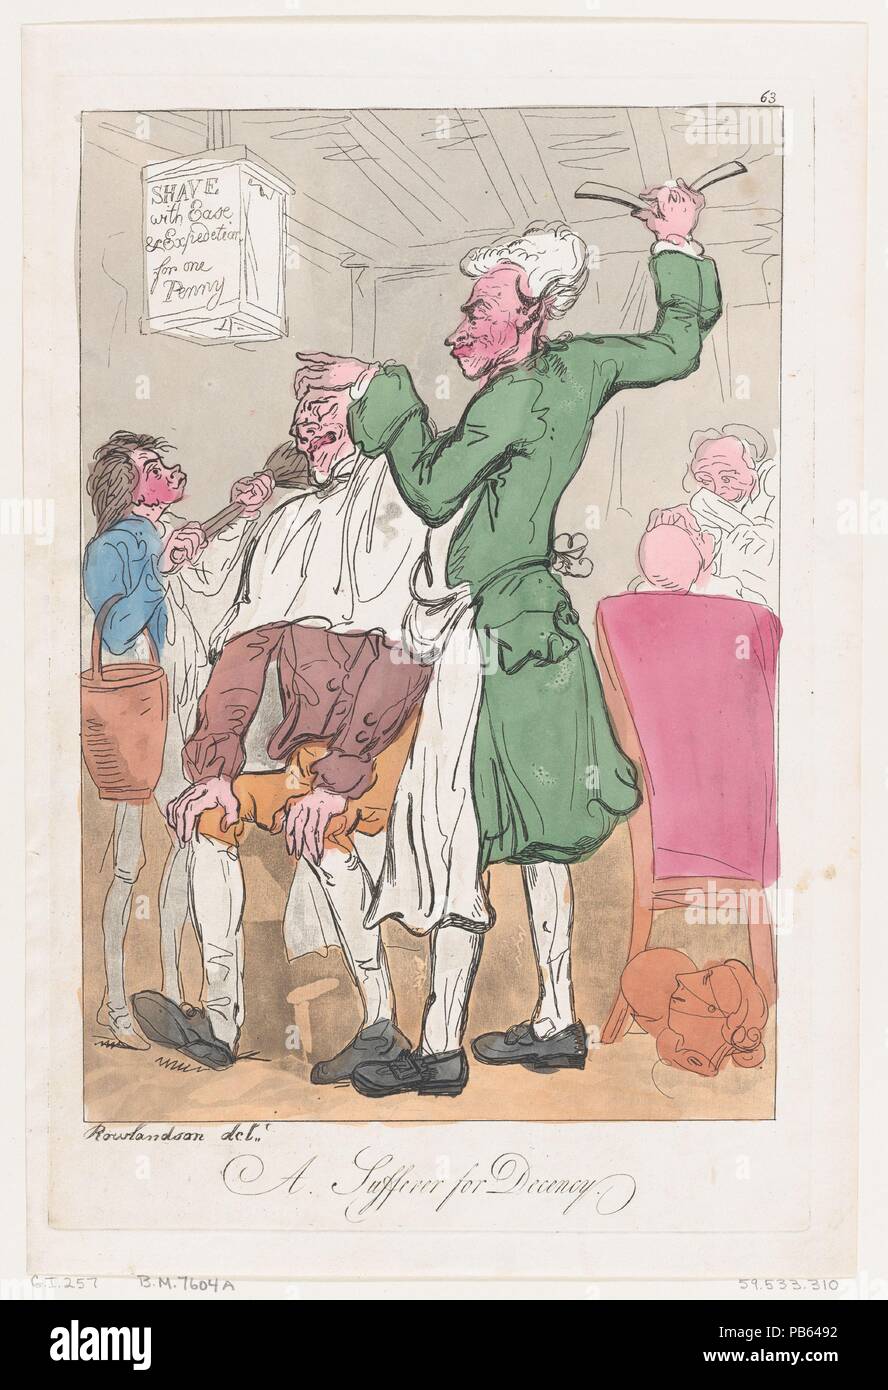 A Sufferer for Decency. Artist: Thomas Rowlandson (British, London 1757-1827 London). Dimensions: Sheet: 15 3/16 × 10 1/16 in. (38.5 × 25.5 cm)  Plate: 14 × 9 1/4 in. (35.5 × 23.5 cm). Publisher: Mrs. Lay (British, active Brighton, ca. 1790). Date: June 20, 1789. Museum: Metropolitan Museum of Art, New York, USA. Stock Photo